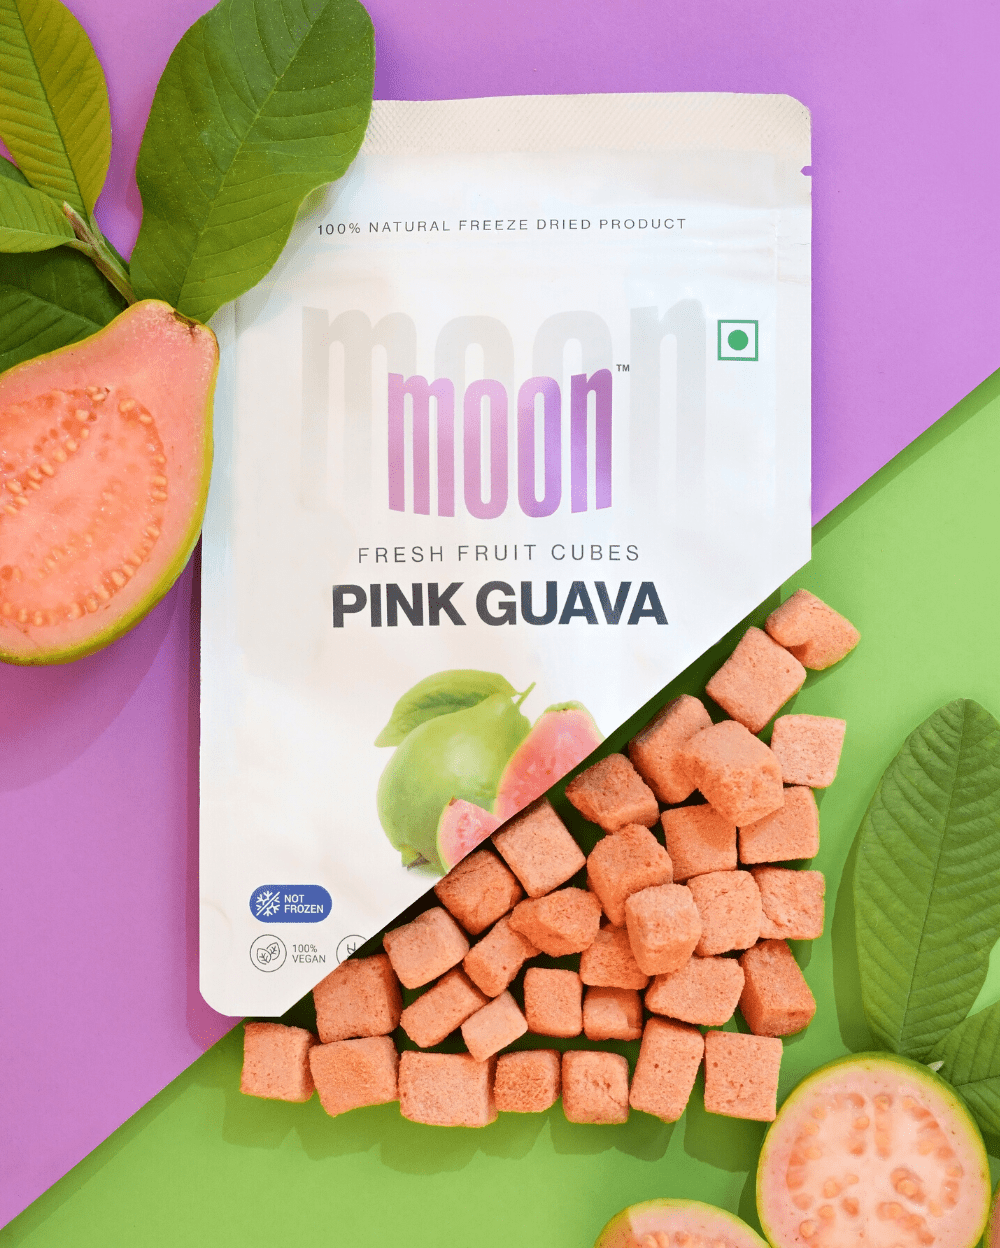 Package of Moon Freeze Dried Pink Guava + Jamun Cubes by MOONFREEZE FOODS PRIVATE LIMITED next to fresh guava slices on a two-tone purple and green background, presenting a captivating option among exotic snacks.